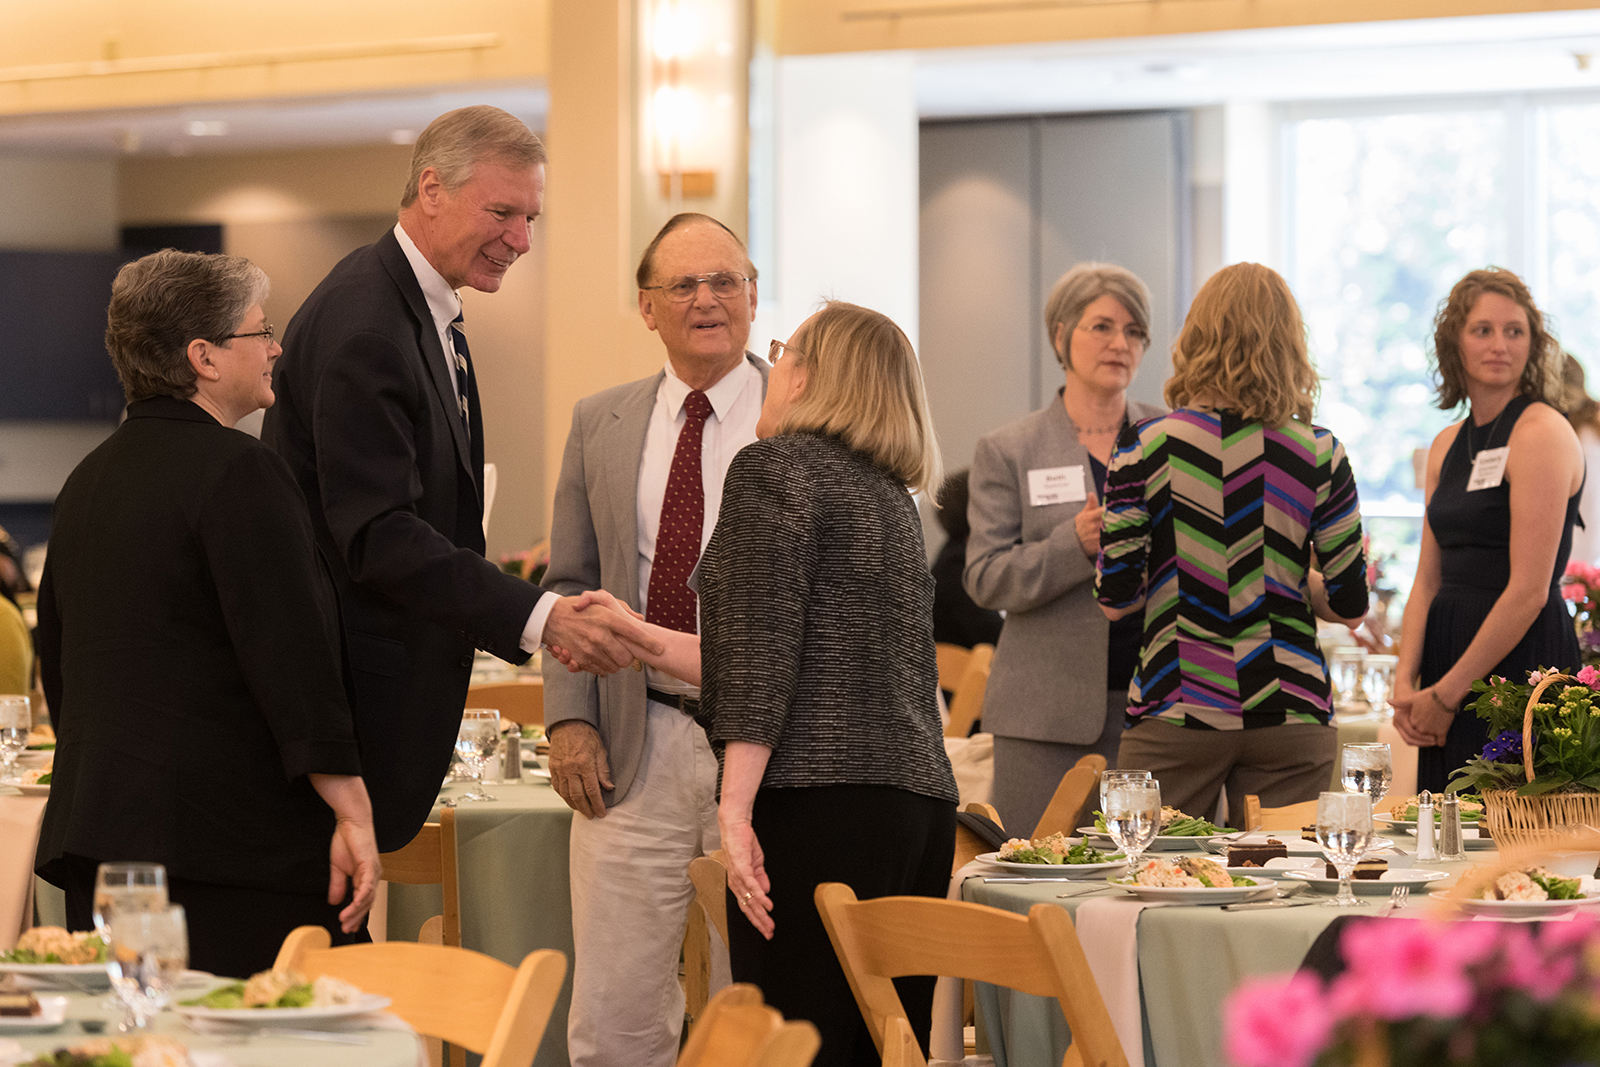 President G.P. "Bud" Peterson visits with attendees at the 2018 Faculty Staff Honors Luncheon